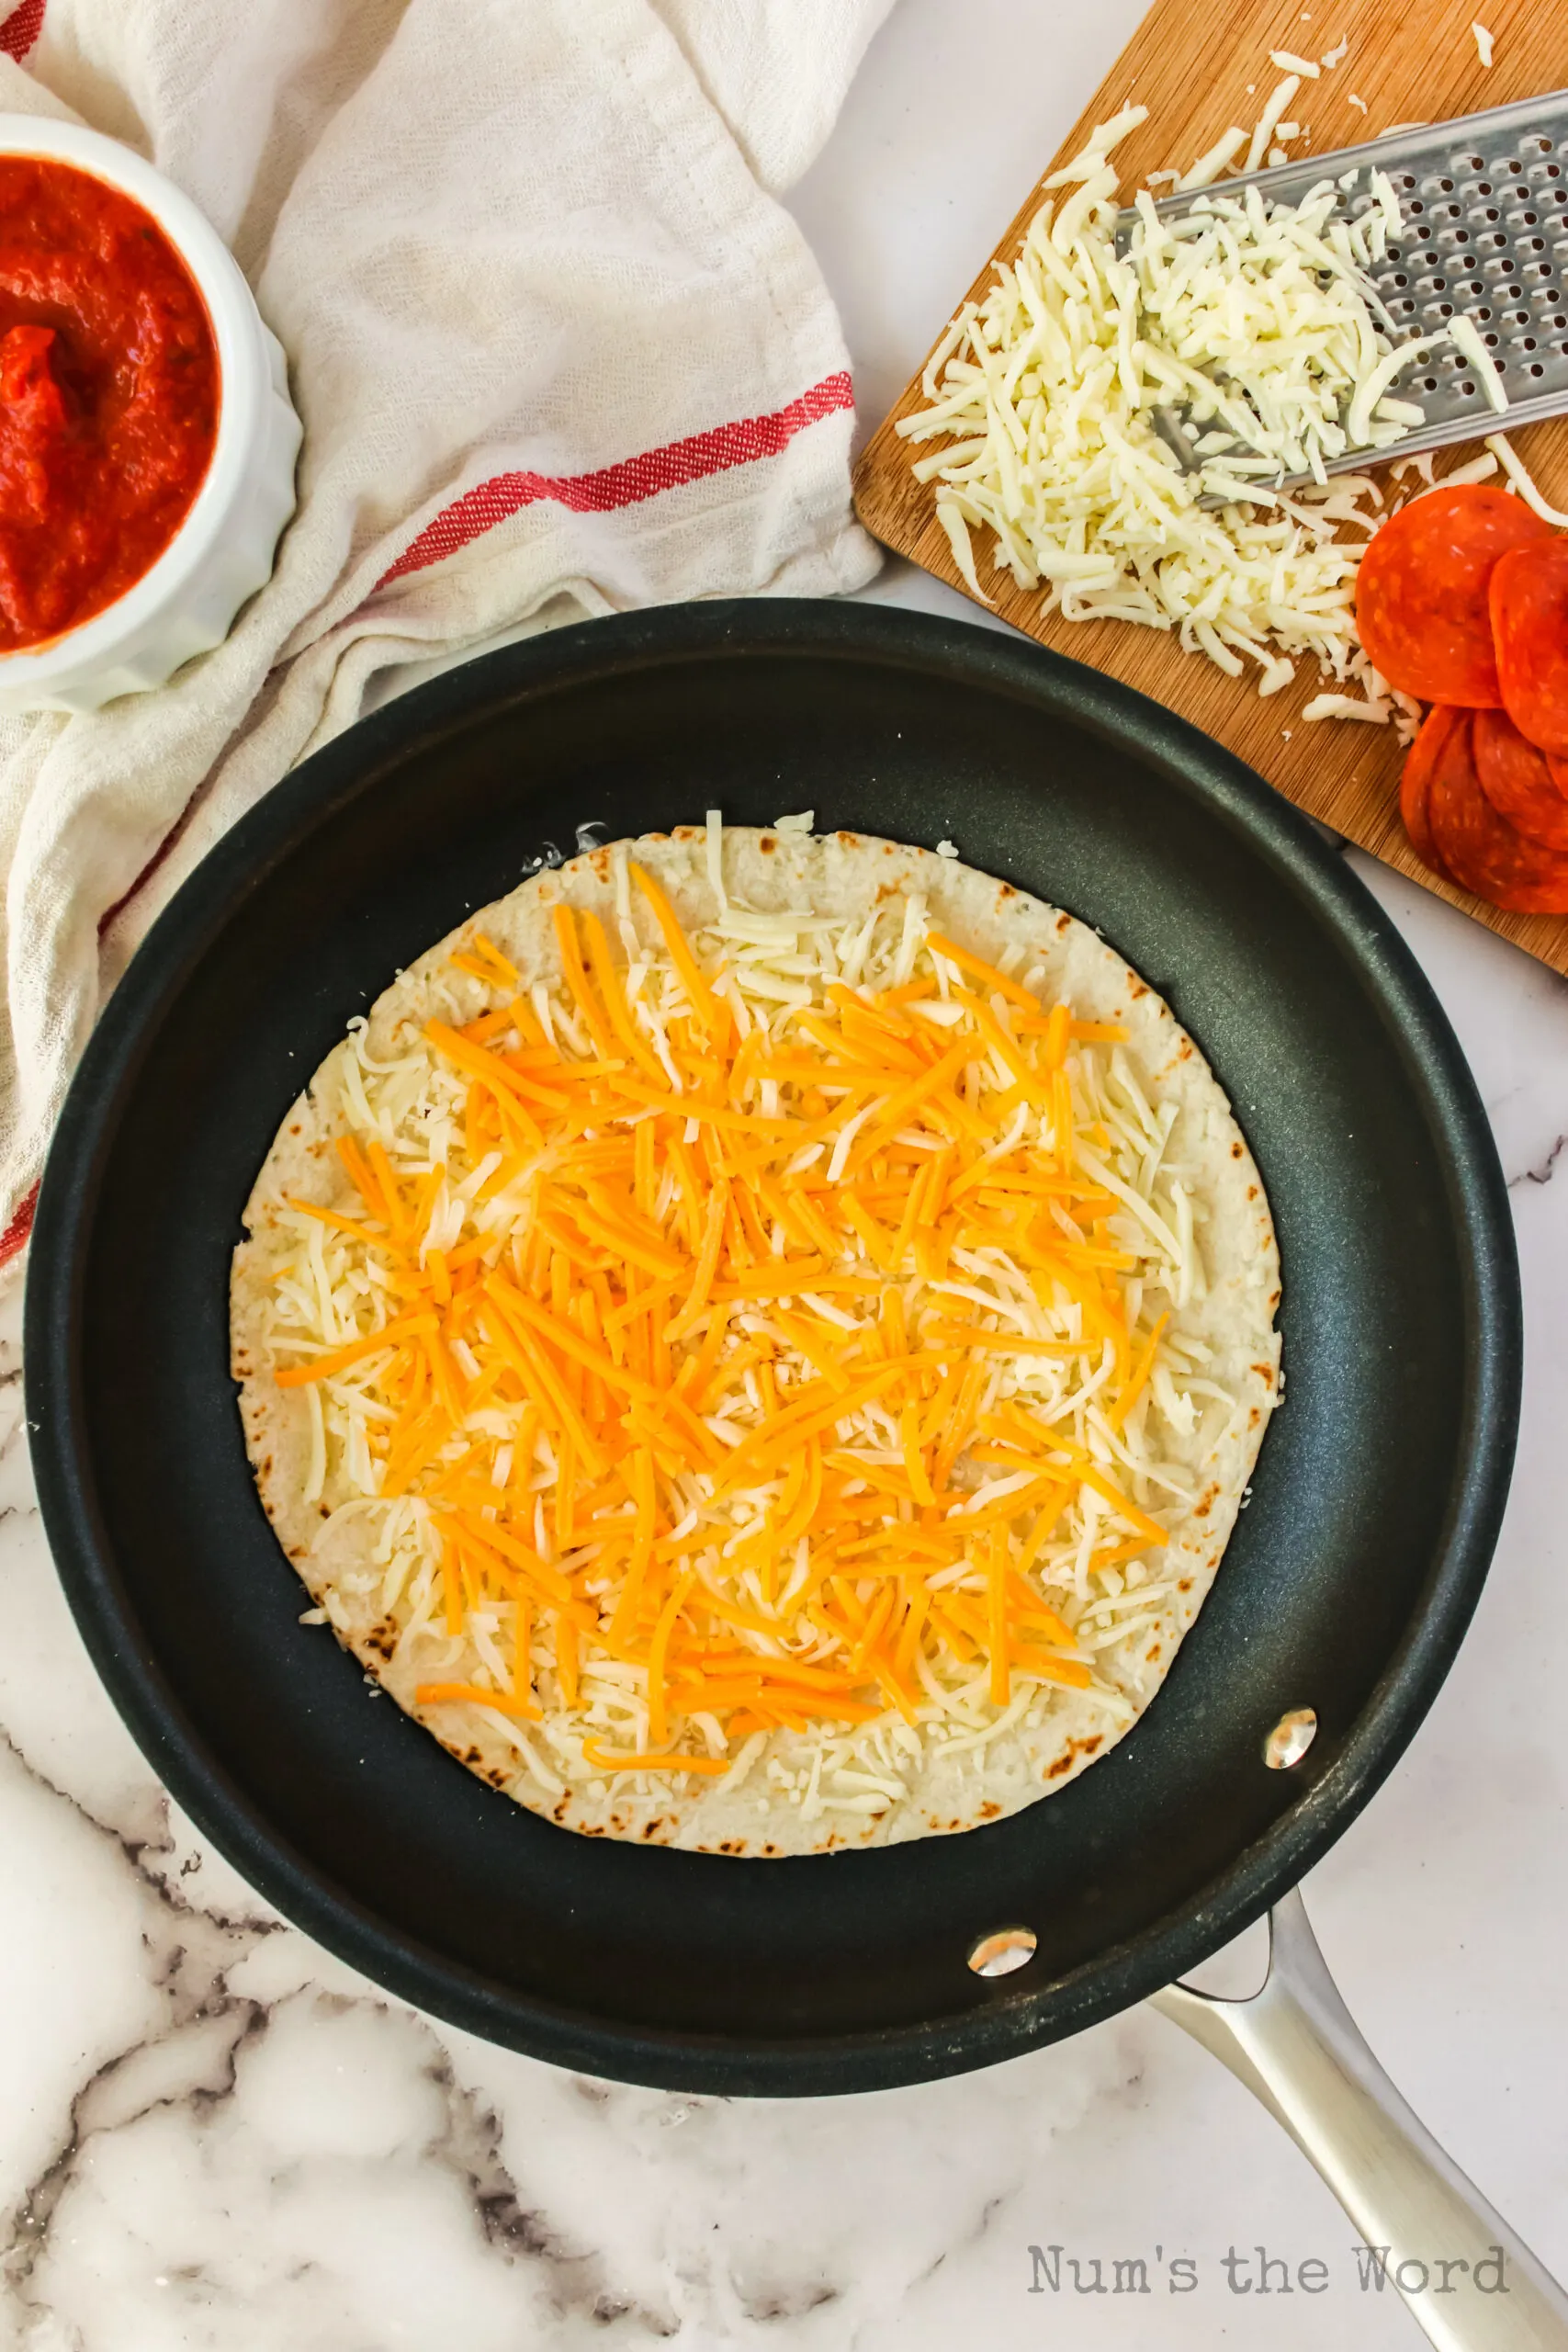 A buttered tortilla in a skillet with cheese on top.